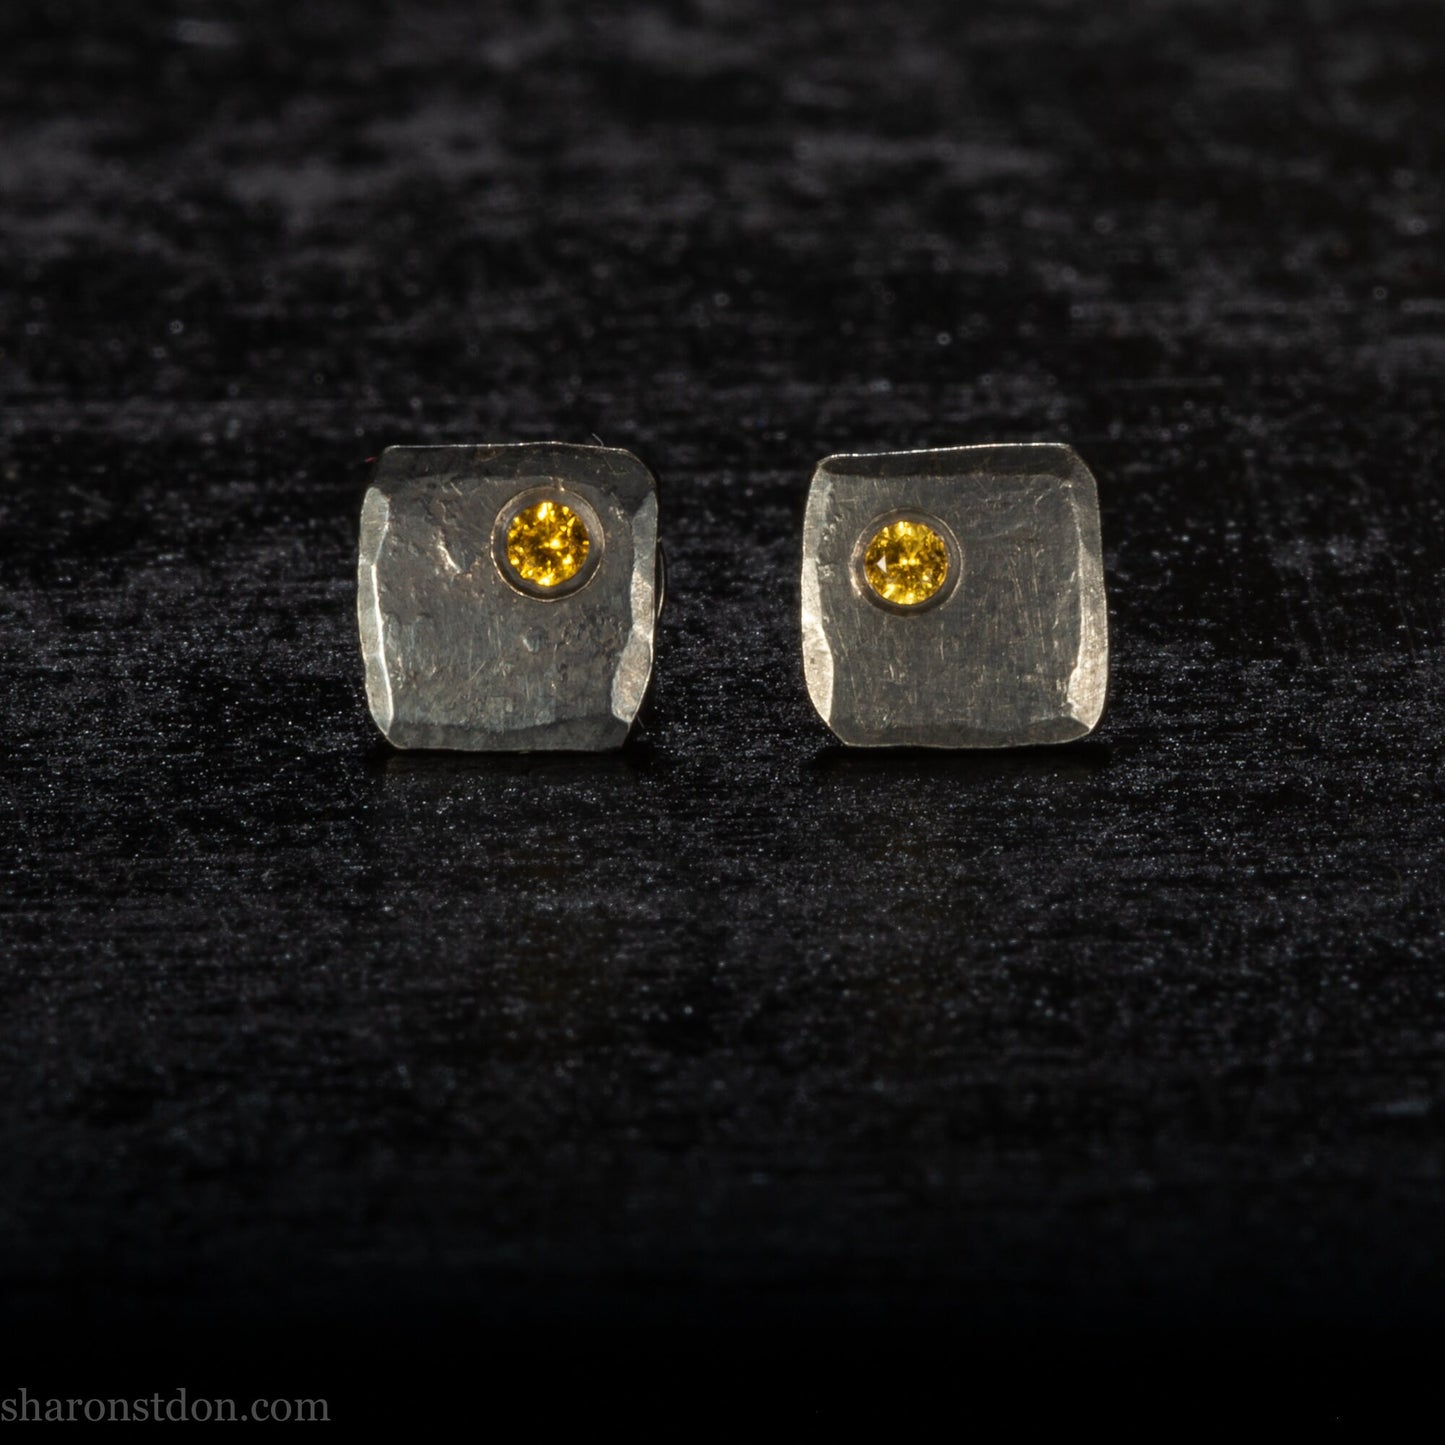 Canary yellow diamond gemstone stud earrings | 925 sterling silver small square stud earrings for men or women | Unique handmade gift